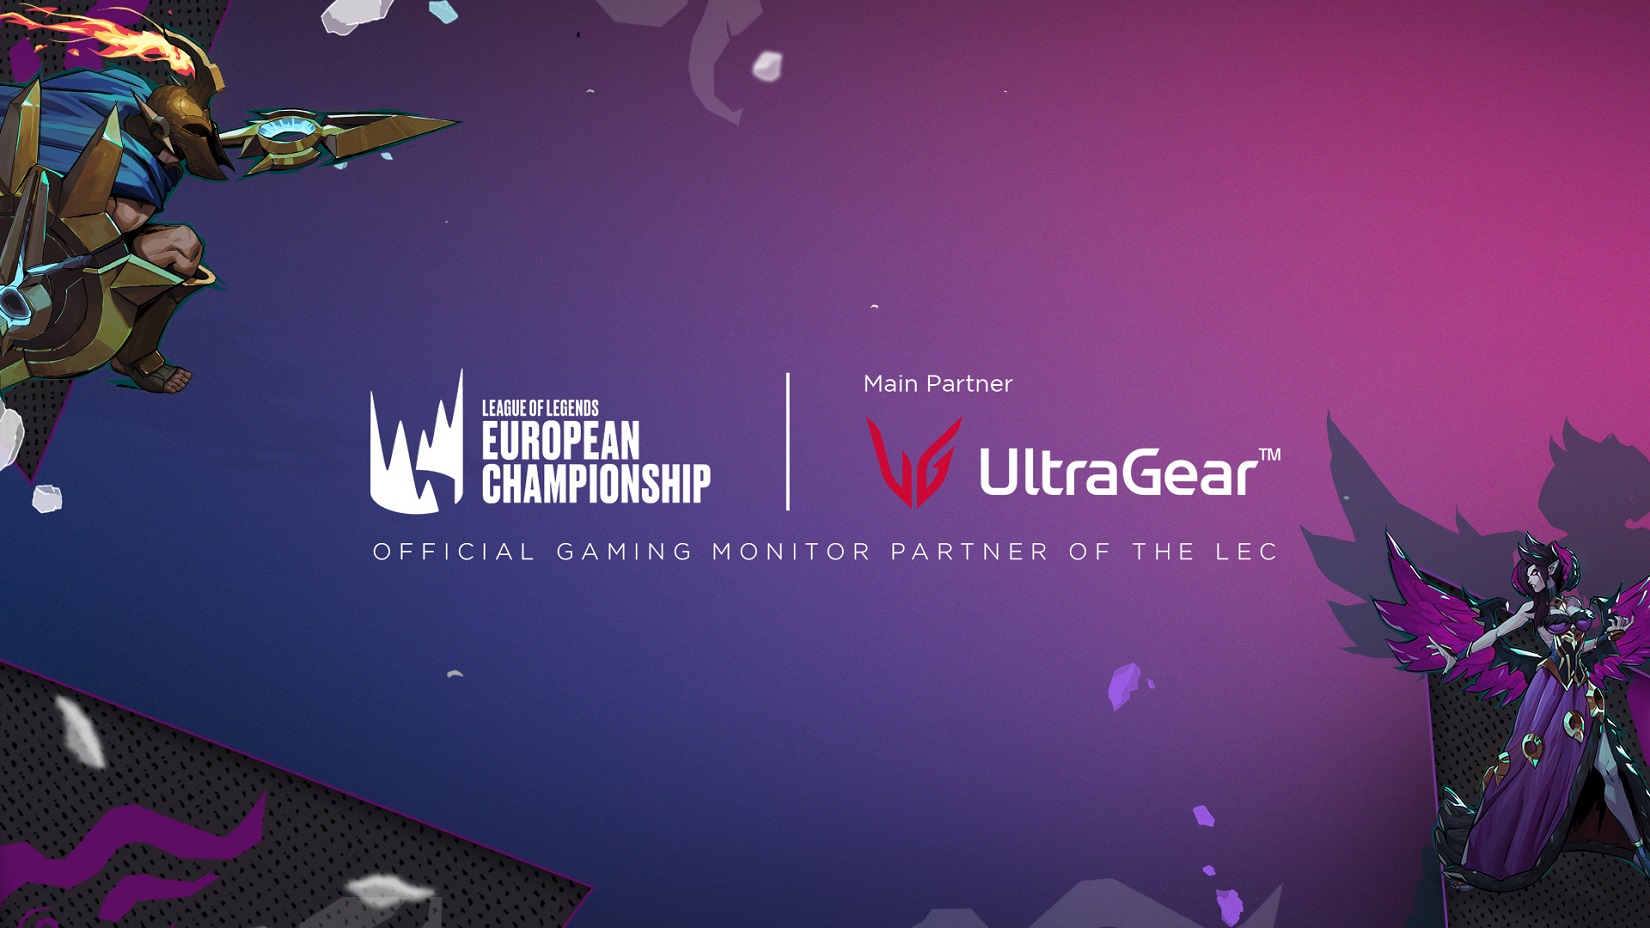 Partnership image with official logos of League of Legends European Championship and LG UltraGear

